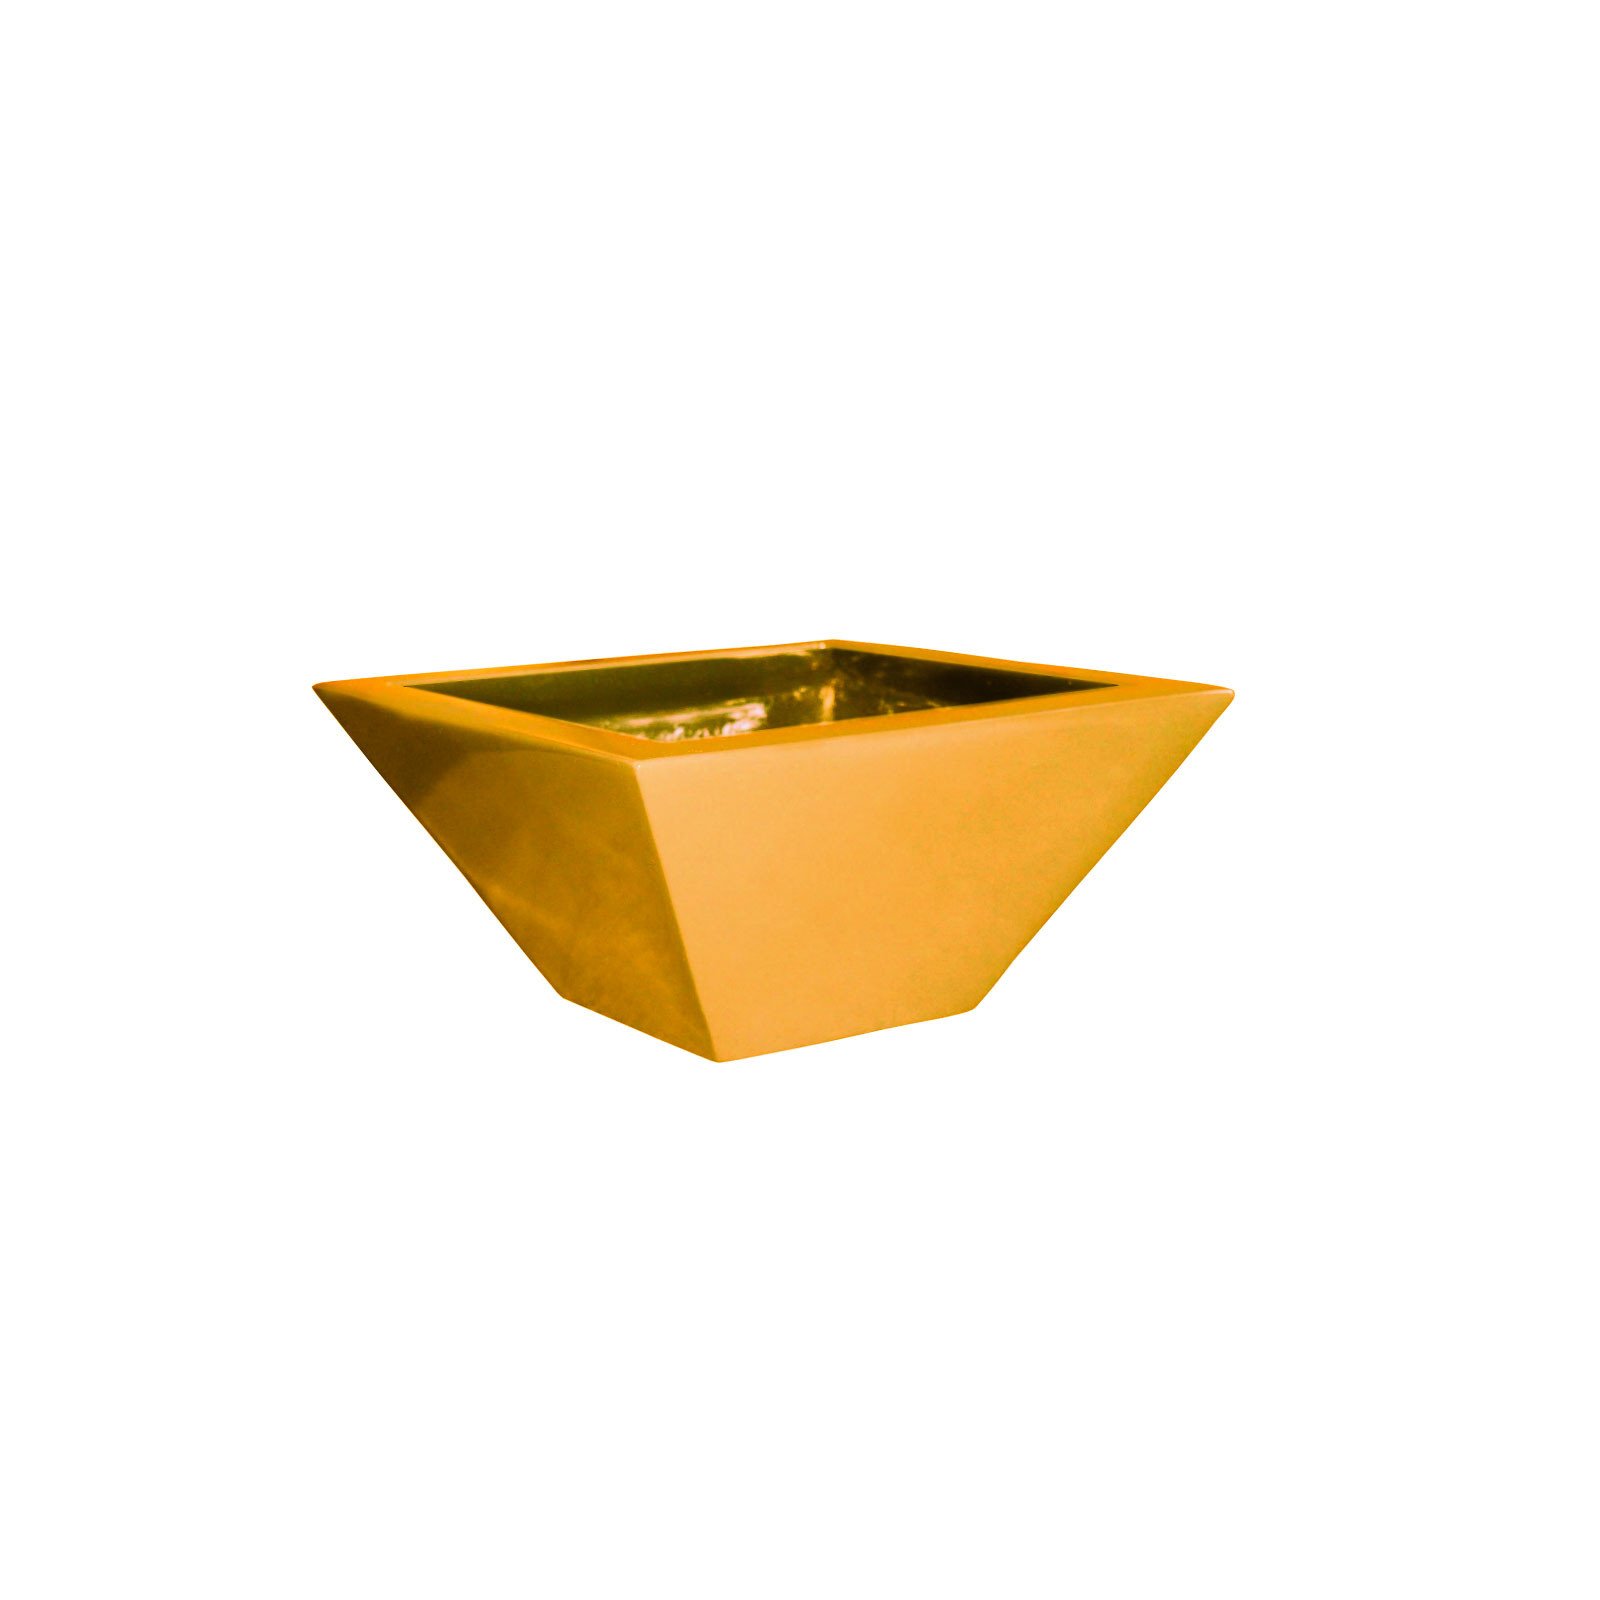 Malaga Square Tapered Table Top Planter